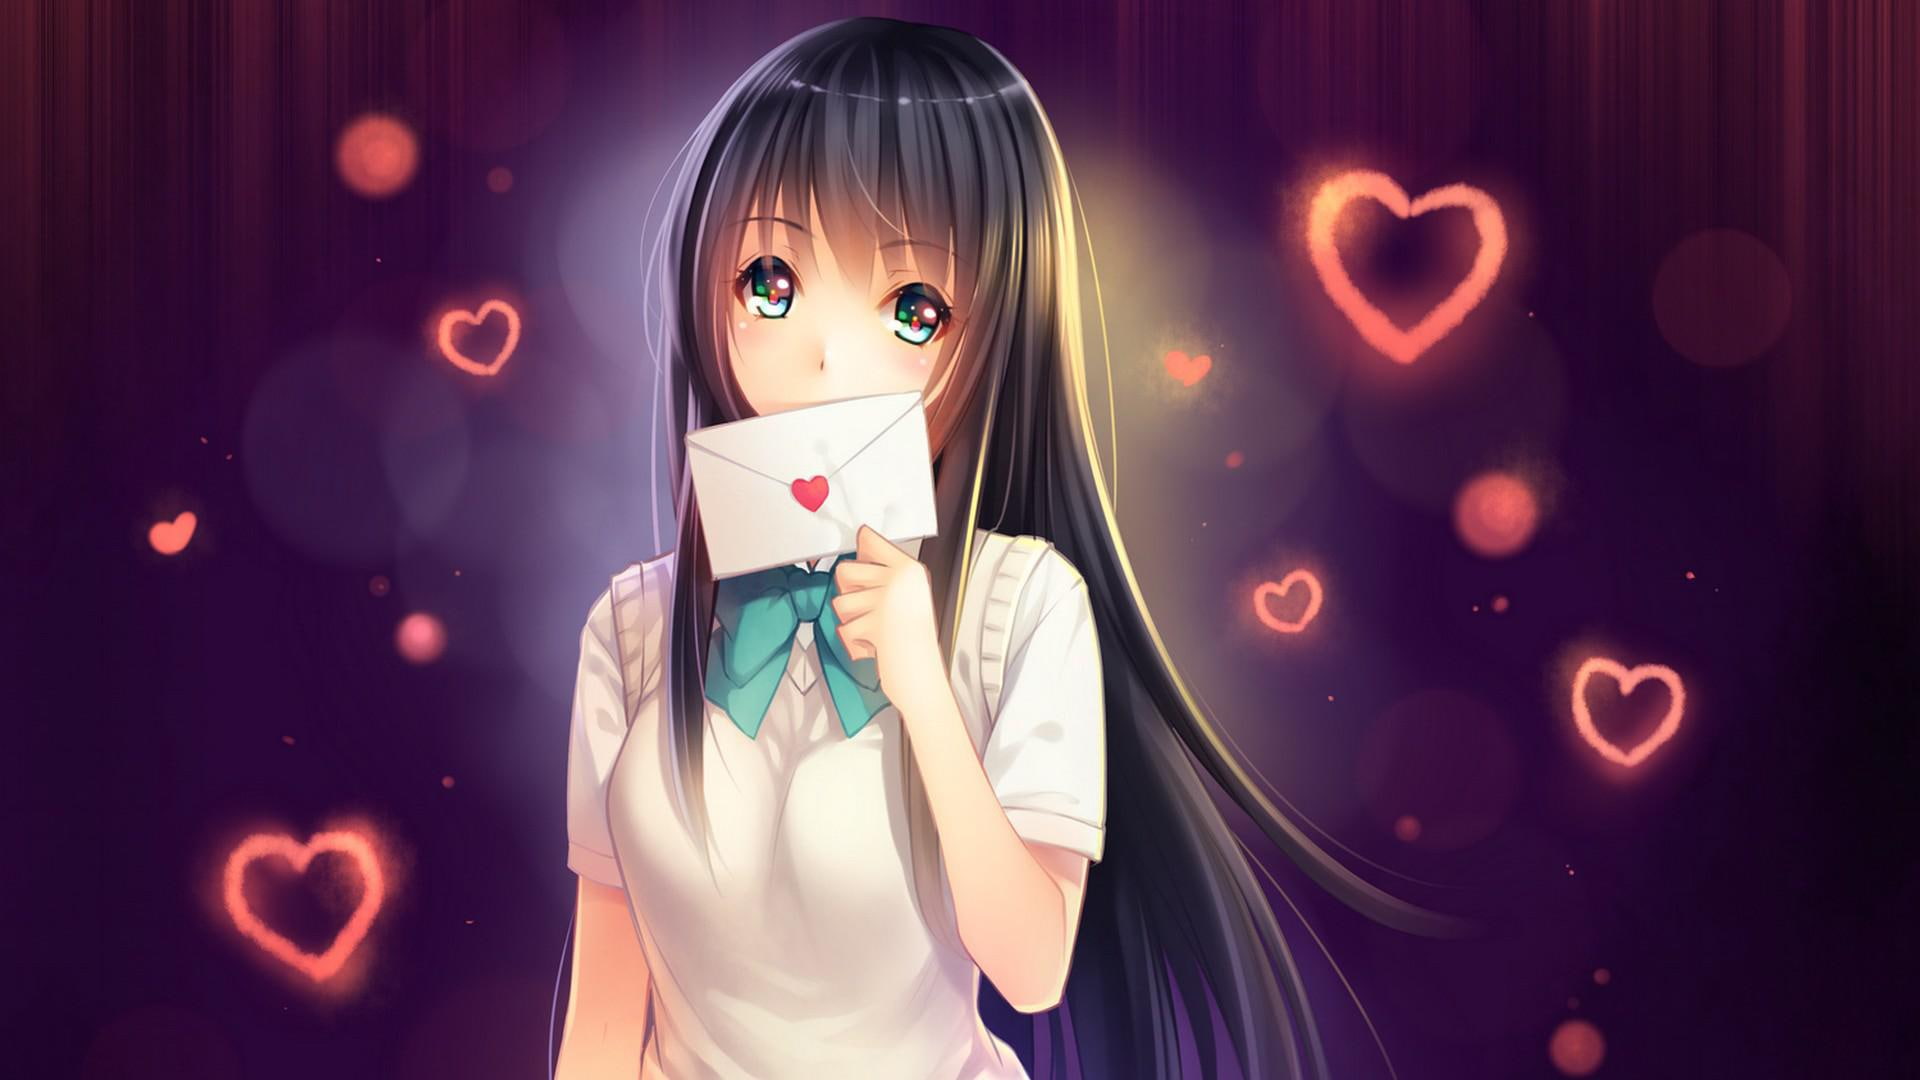 Love letter addressed to you, anime girls, cute, beautiful, love